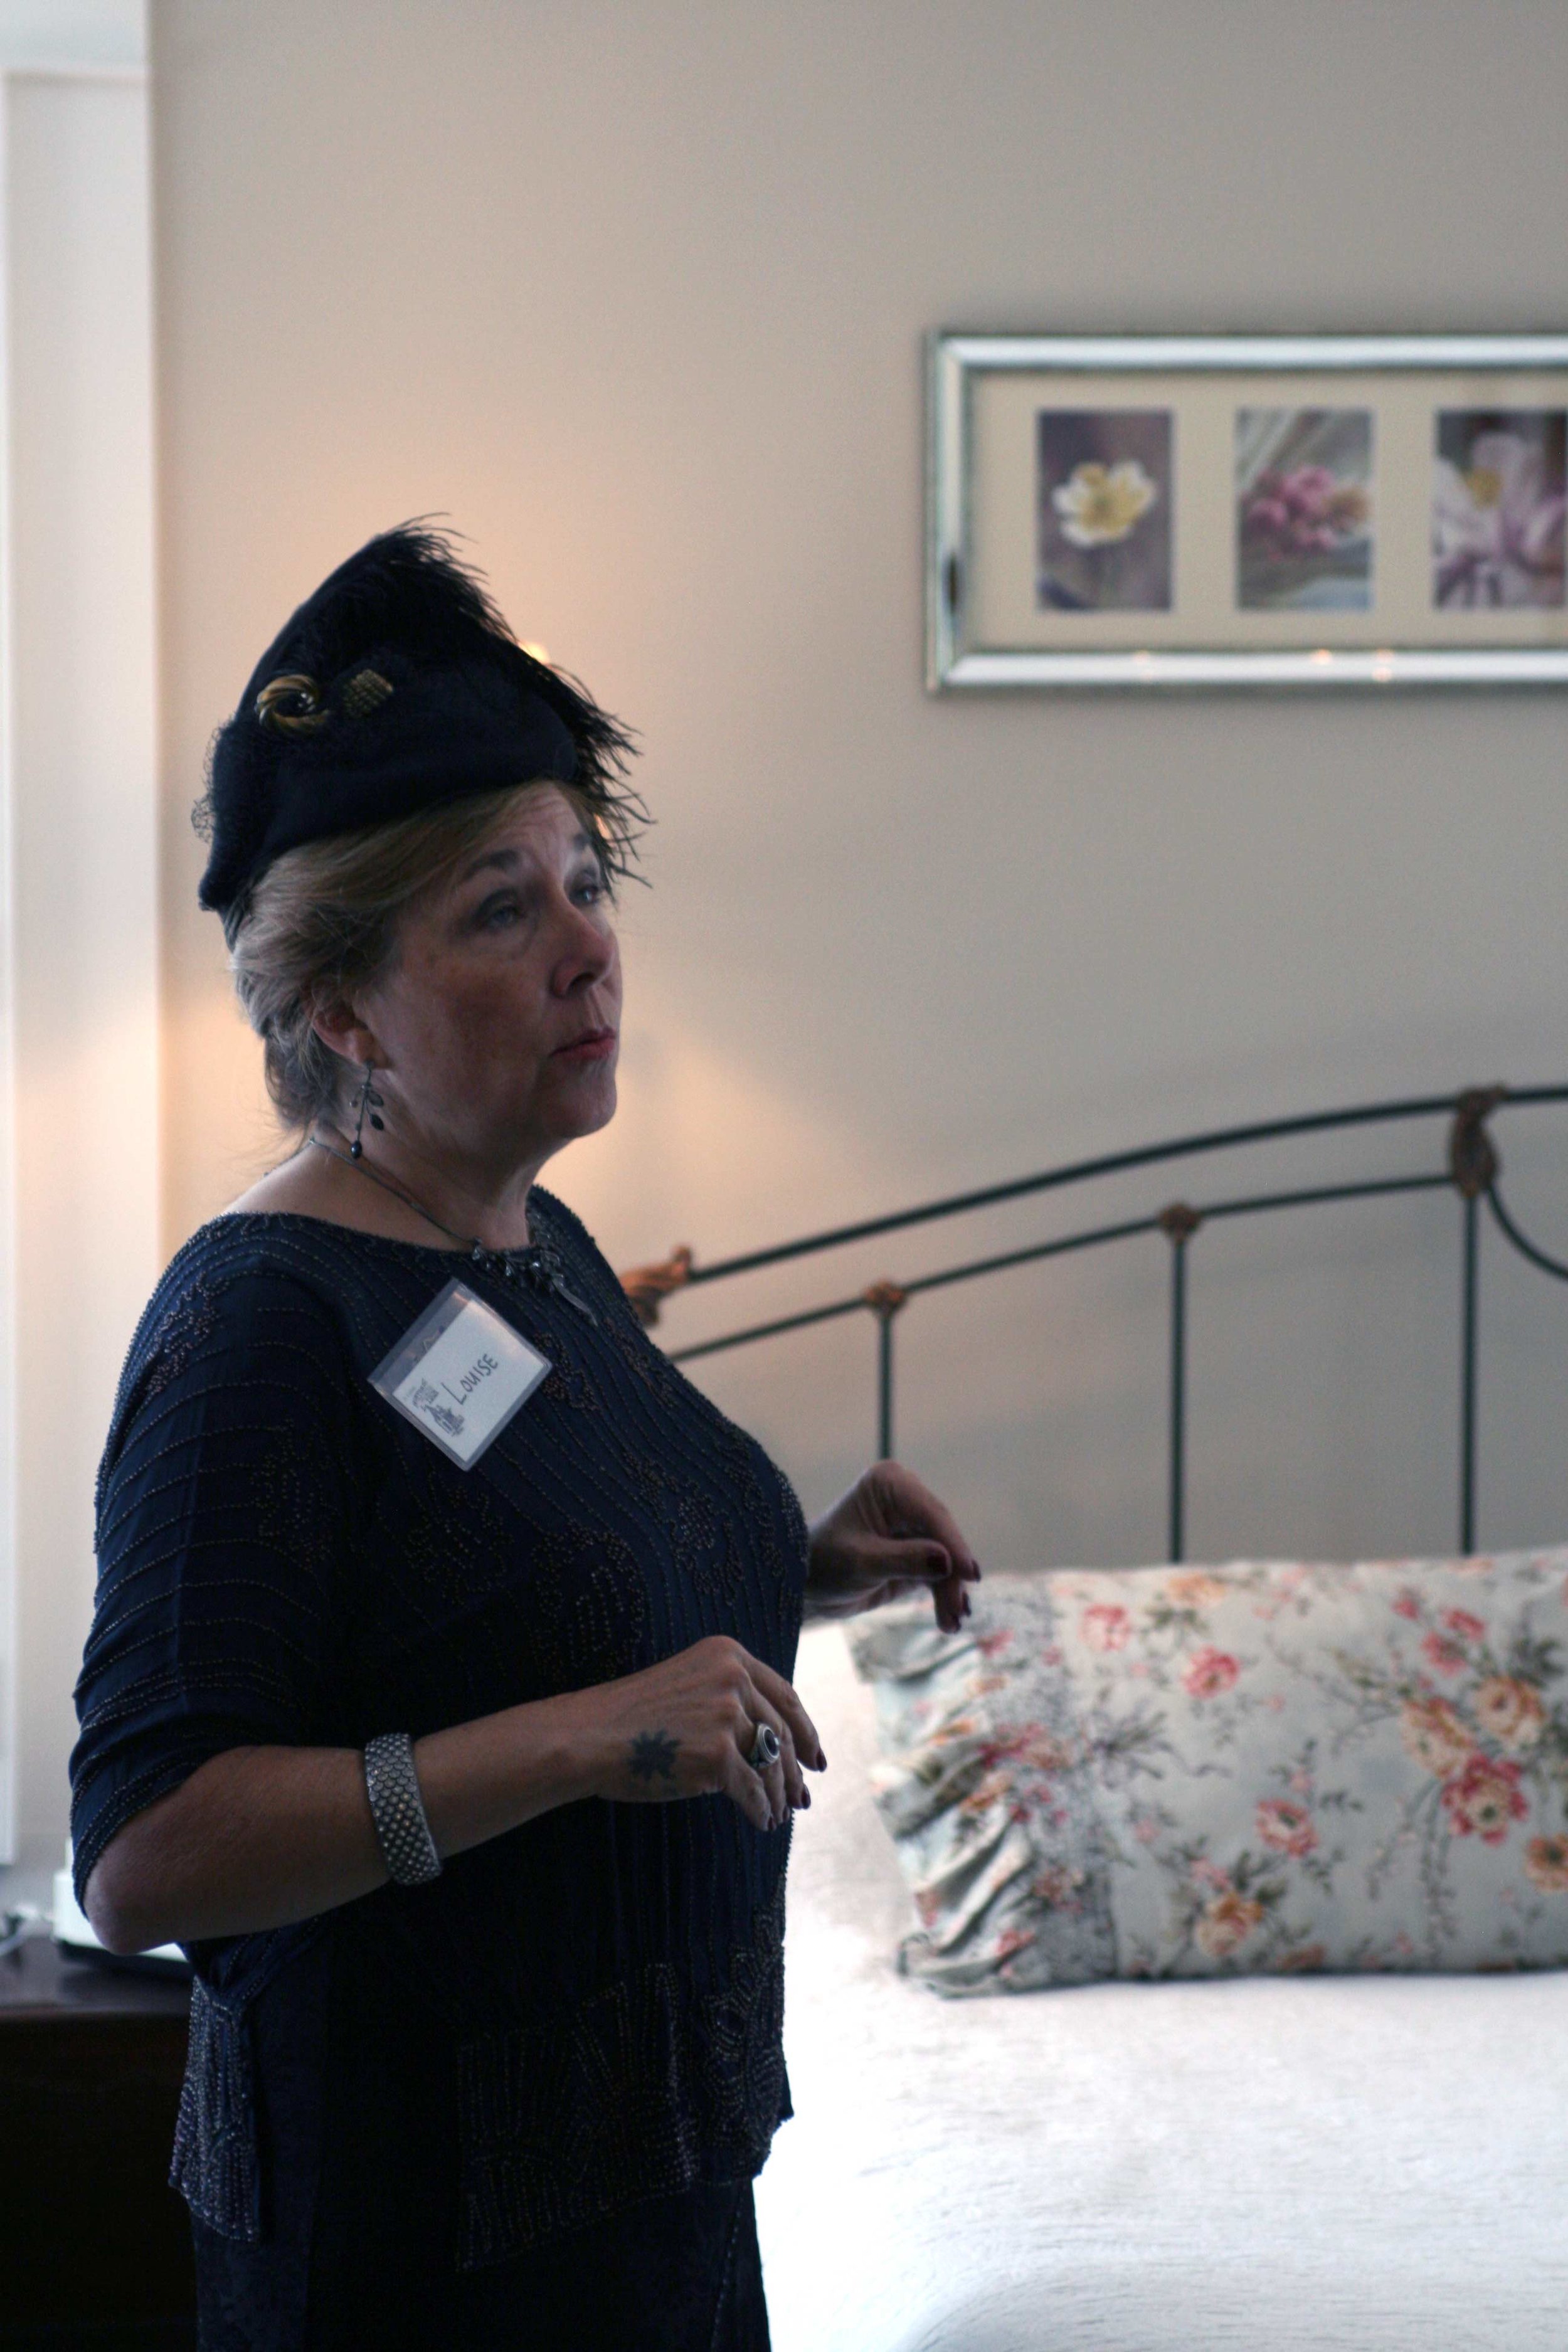  The tour is made possible by volunteer docents who guide guests through the historic homes and inform them about the history &amp; remodel of each room 